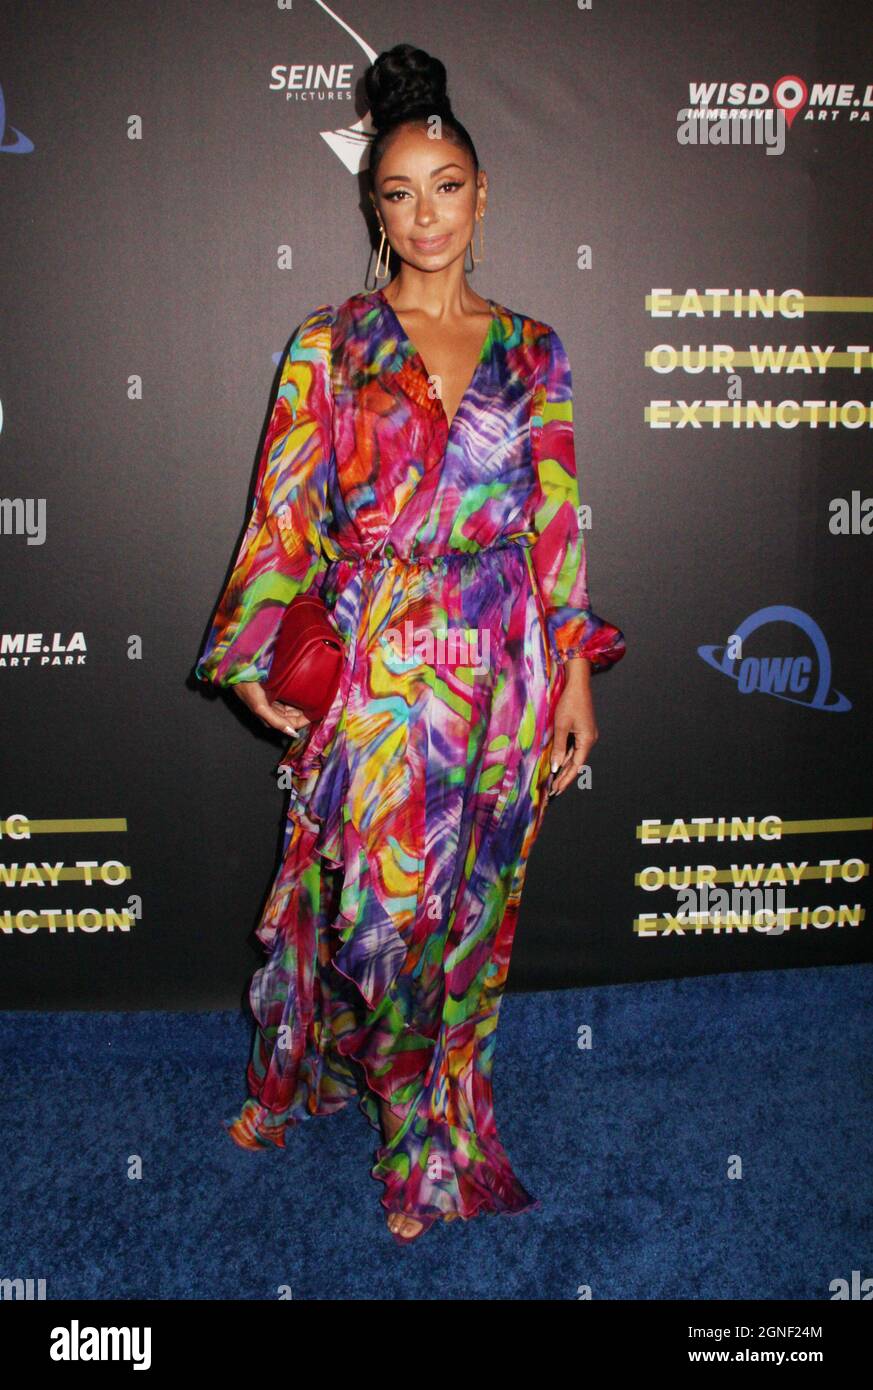 Los Angeles, USA. 14th Sep, 2021. Mya 09/14/2021 The world premiere of "Eating Our Way To Extinction" at Wisdome L.A. in Los Angeles, CA Credit: Cronos/Alamy Live News Stock Photo